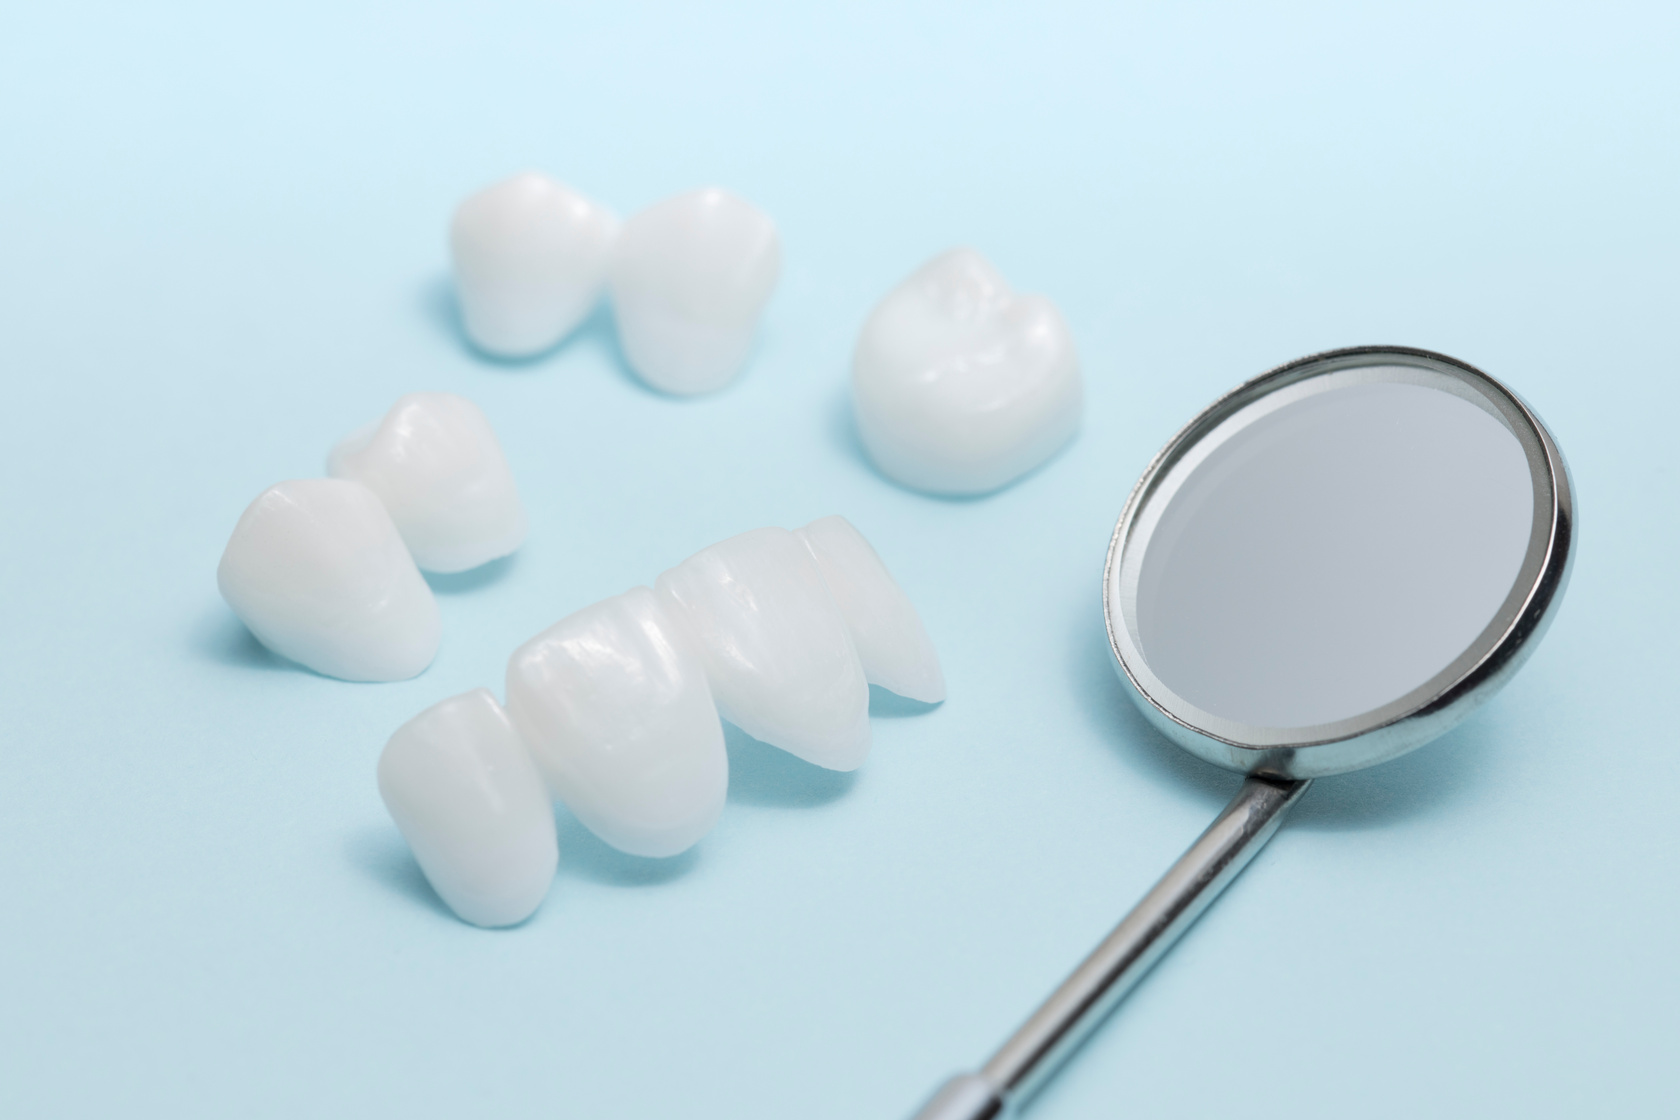 Dental mirror and dentures on a light blue background